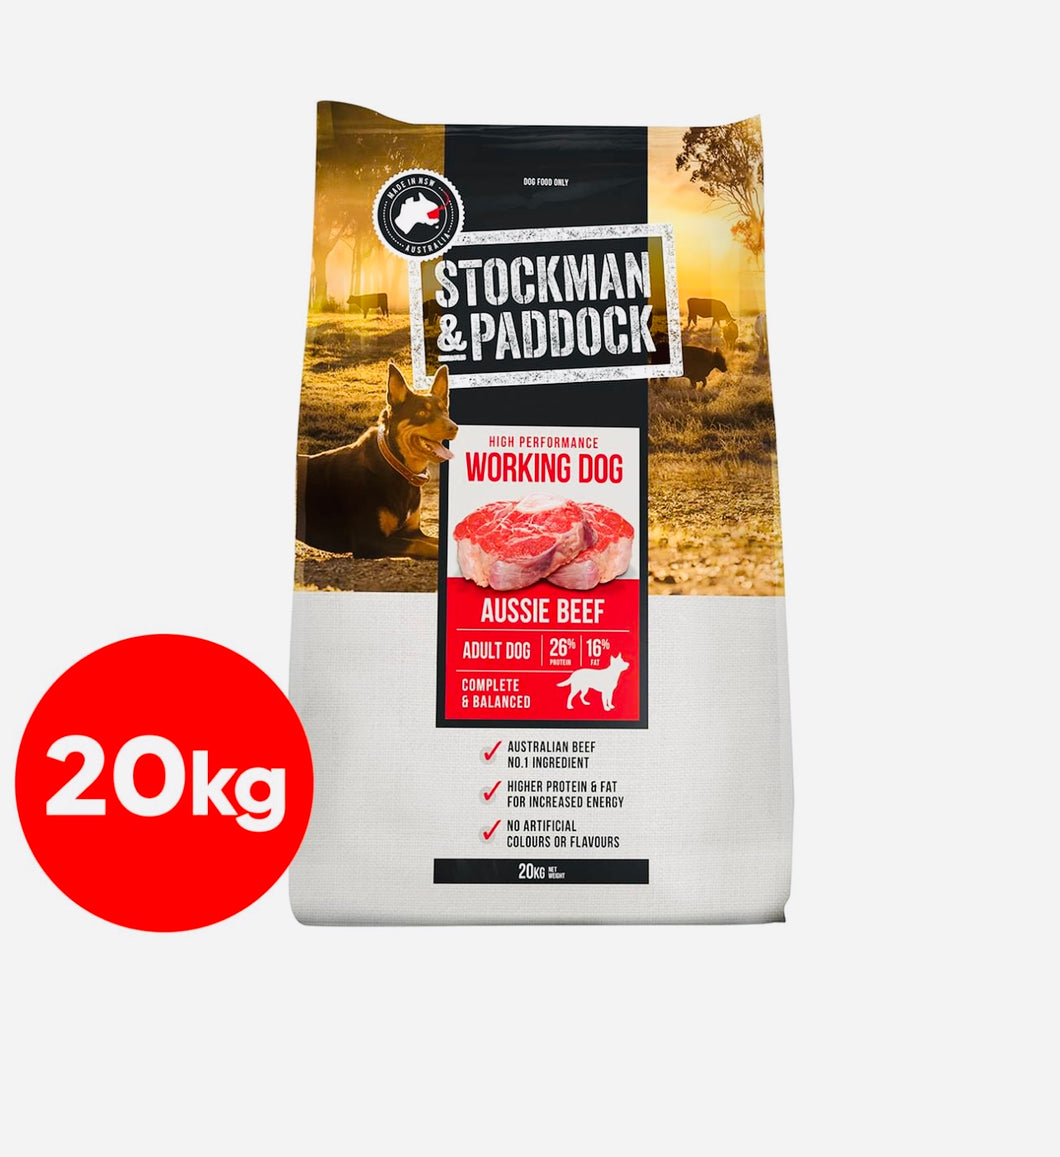 Stockman and paddock High performance working dog food beef 20kg